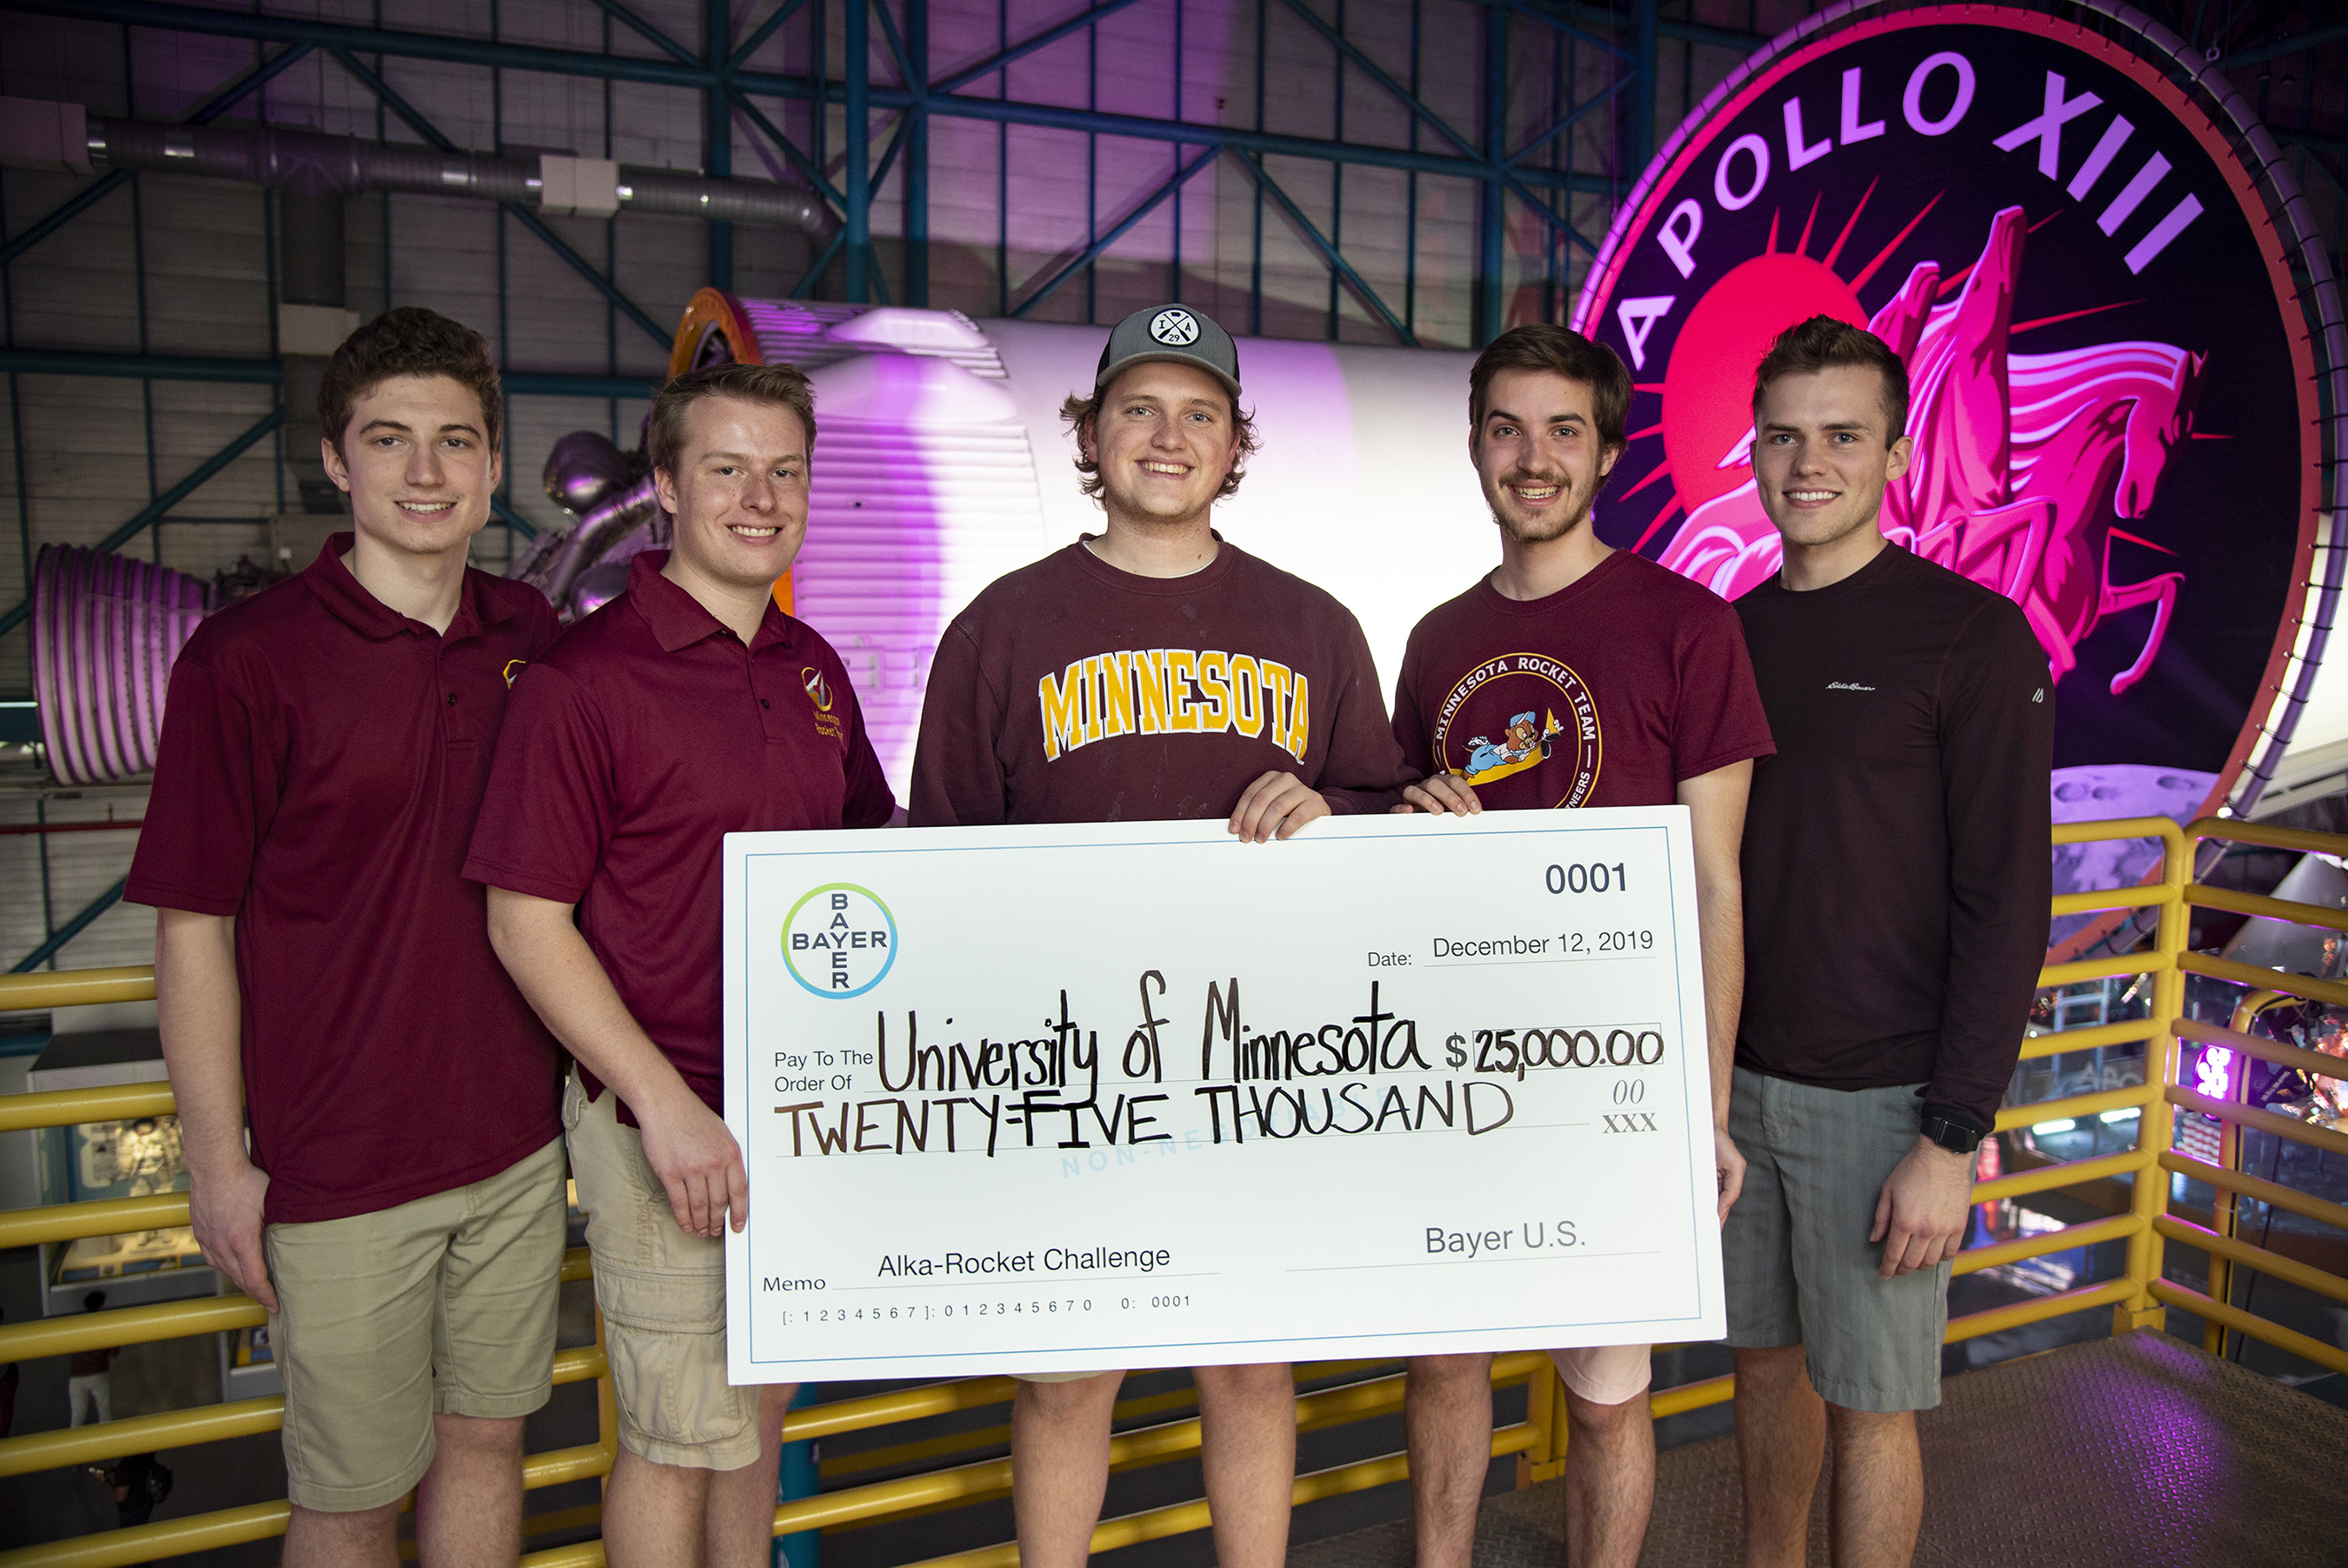 The winning rocket team from the University of Minnesota holds the $25,000 prize check provided by Bayer following the 2019 Alka-Rocket Challenge on Thursday.